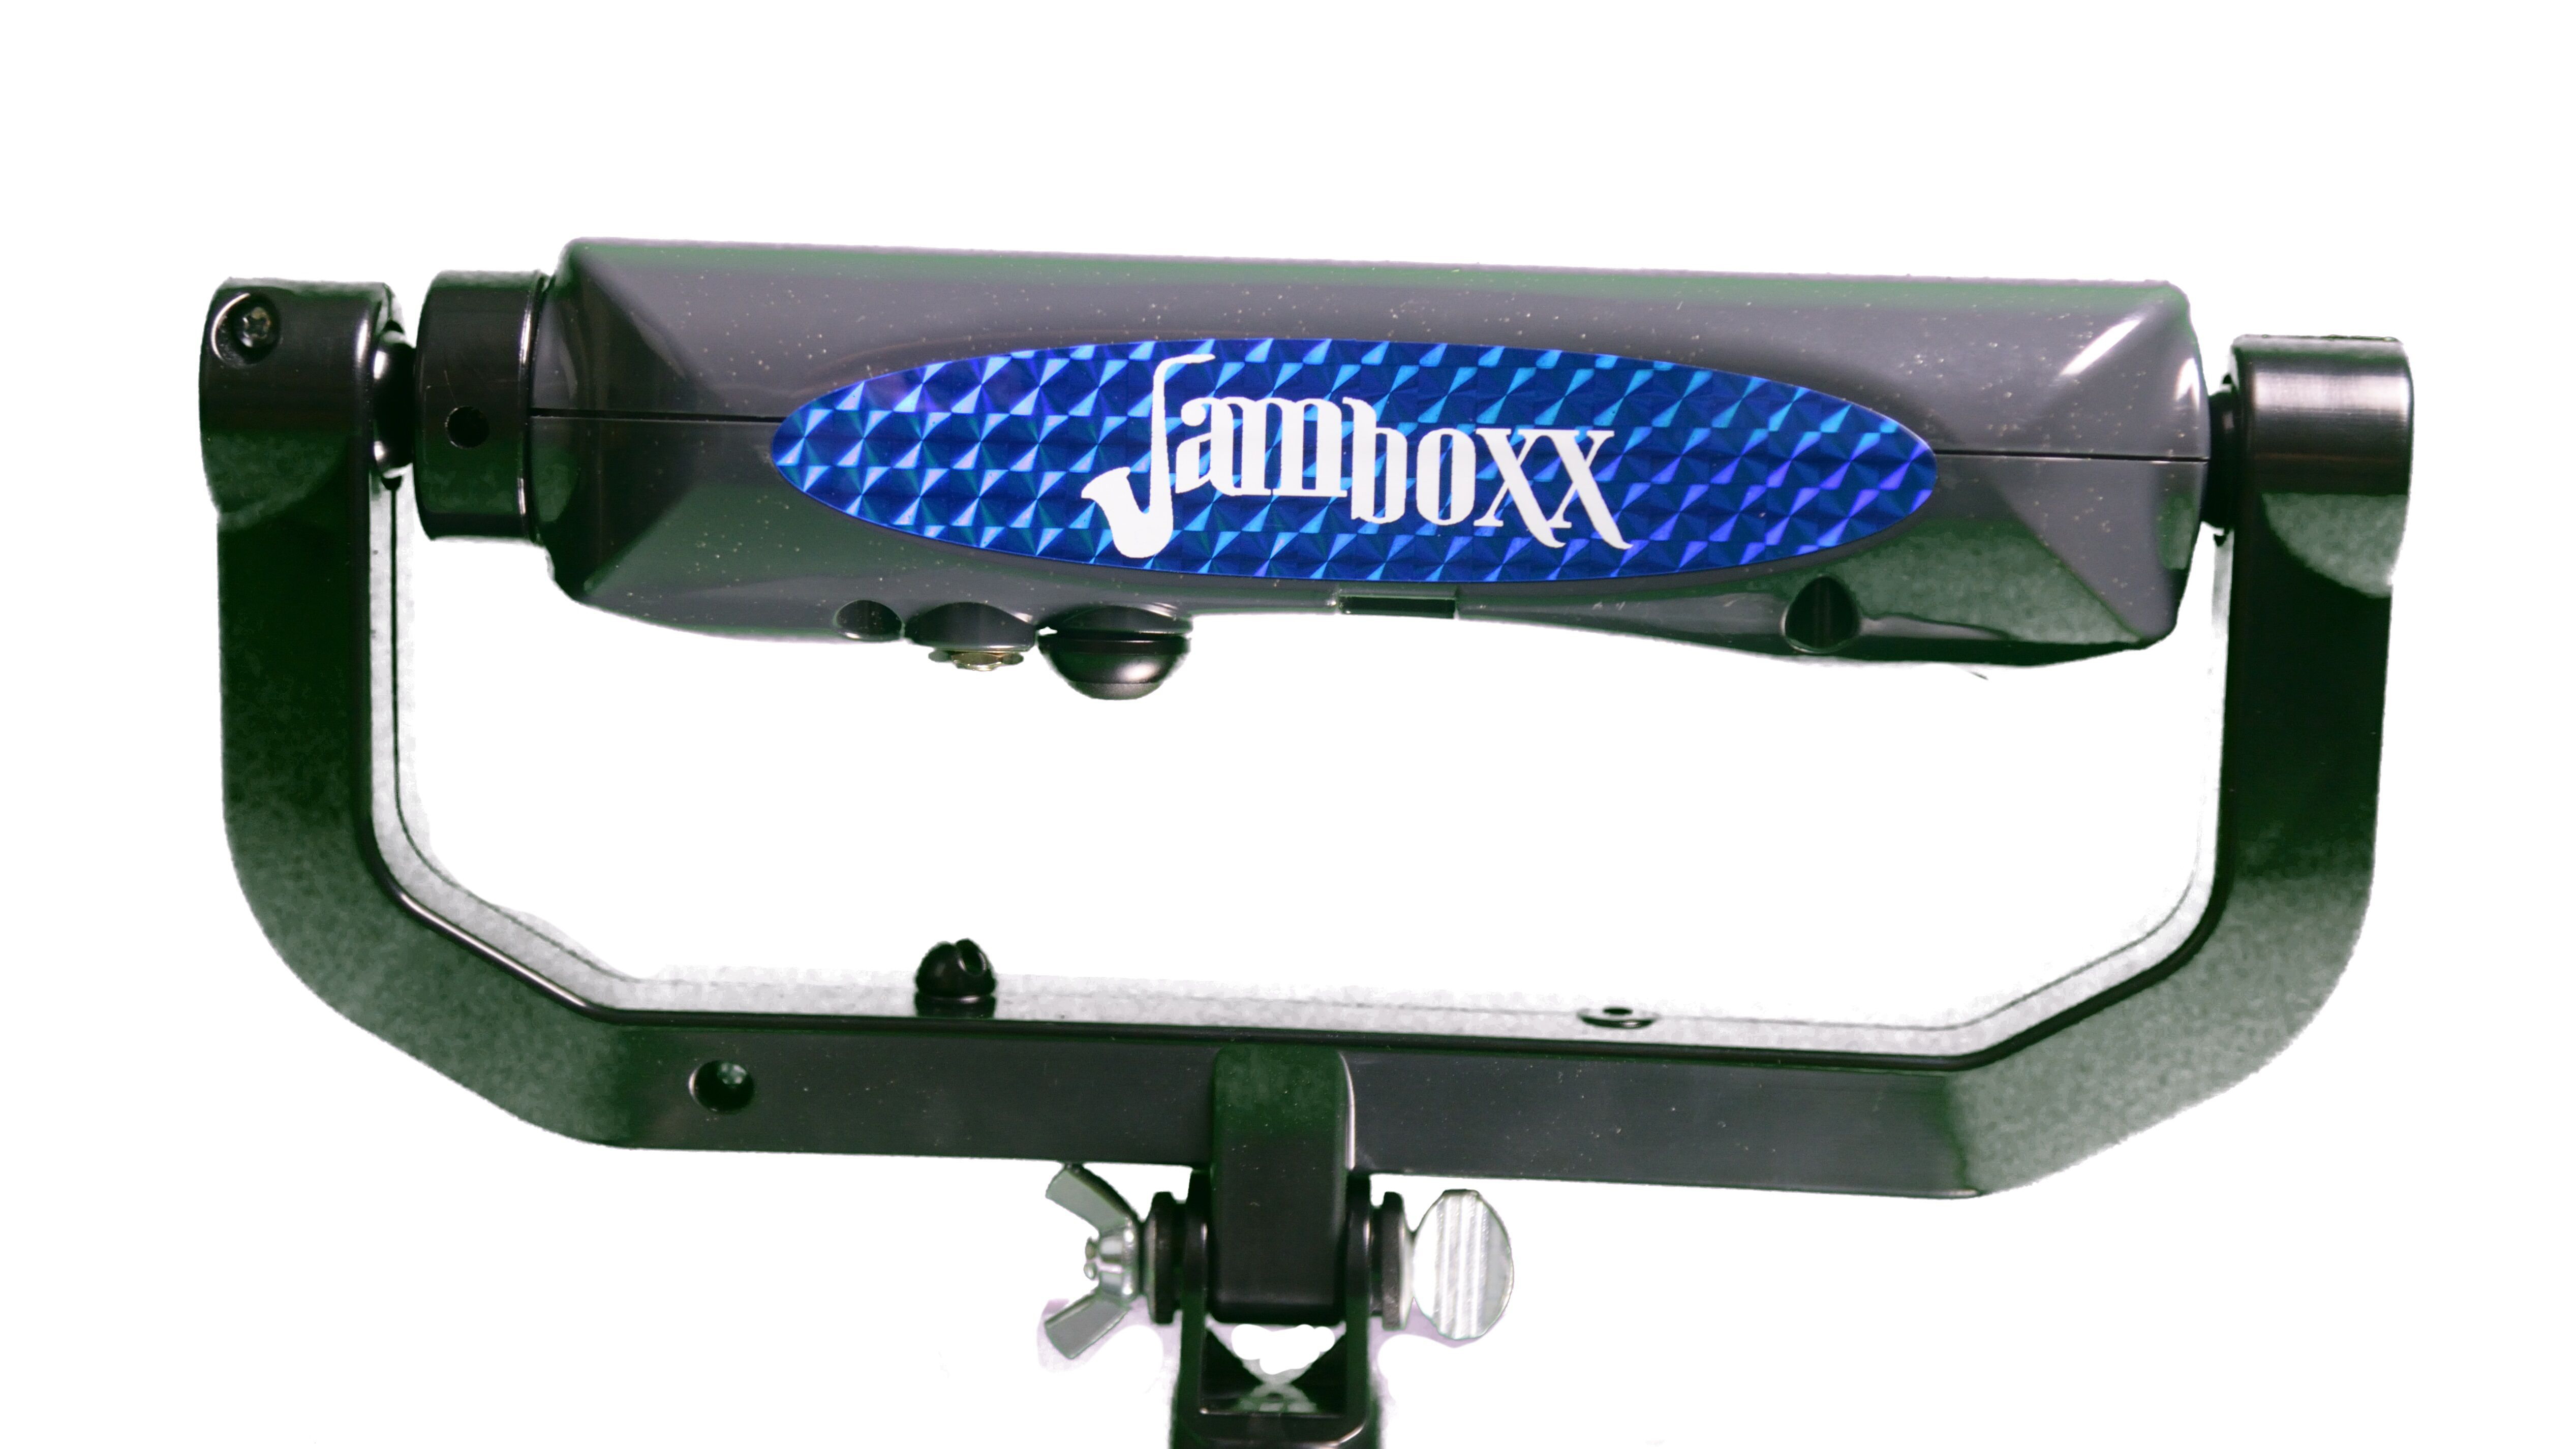 The Jamboxx, a breath powered instrument that can be played hands free.